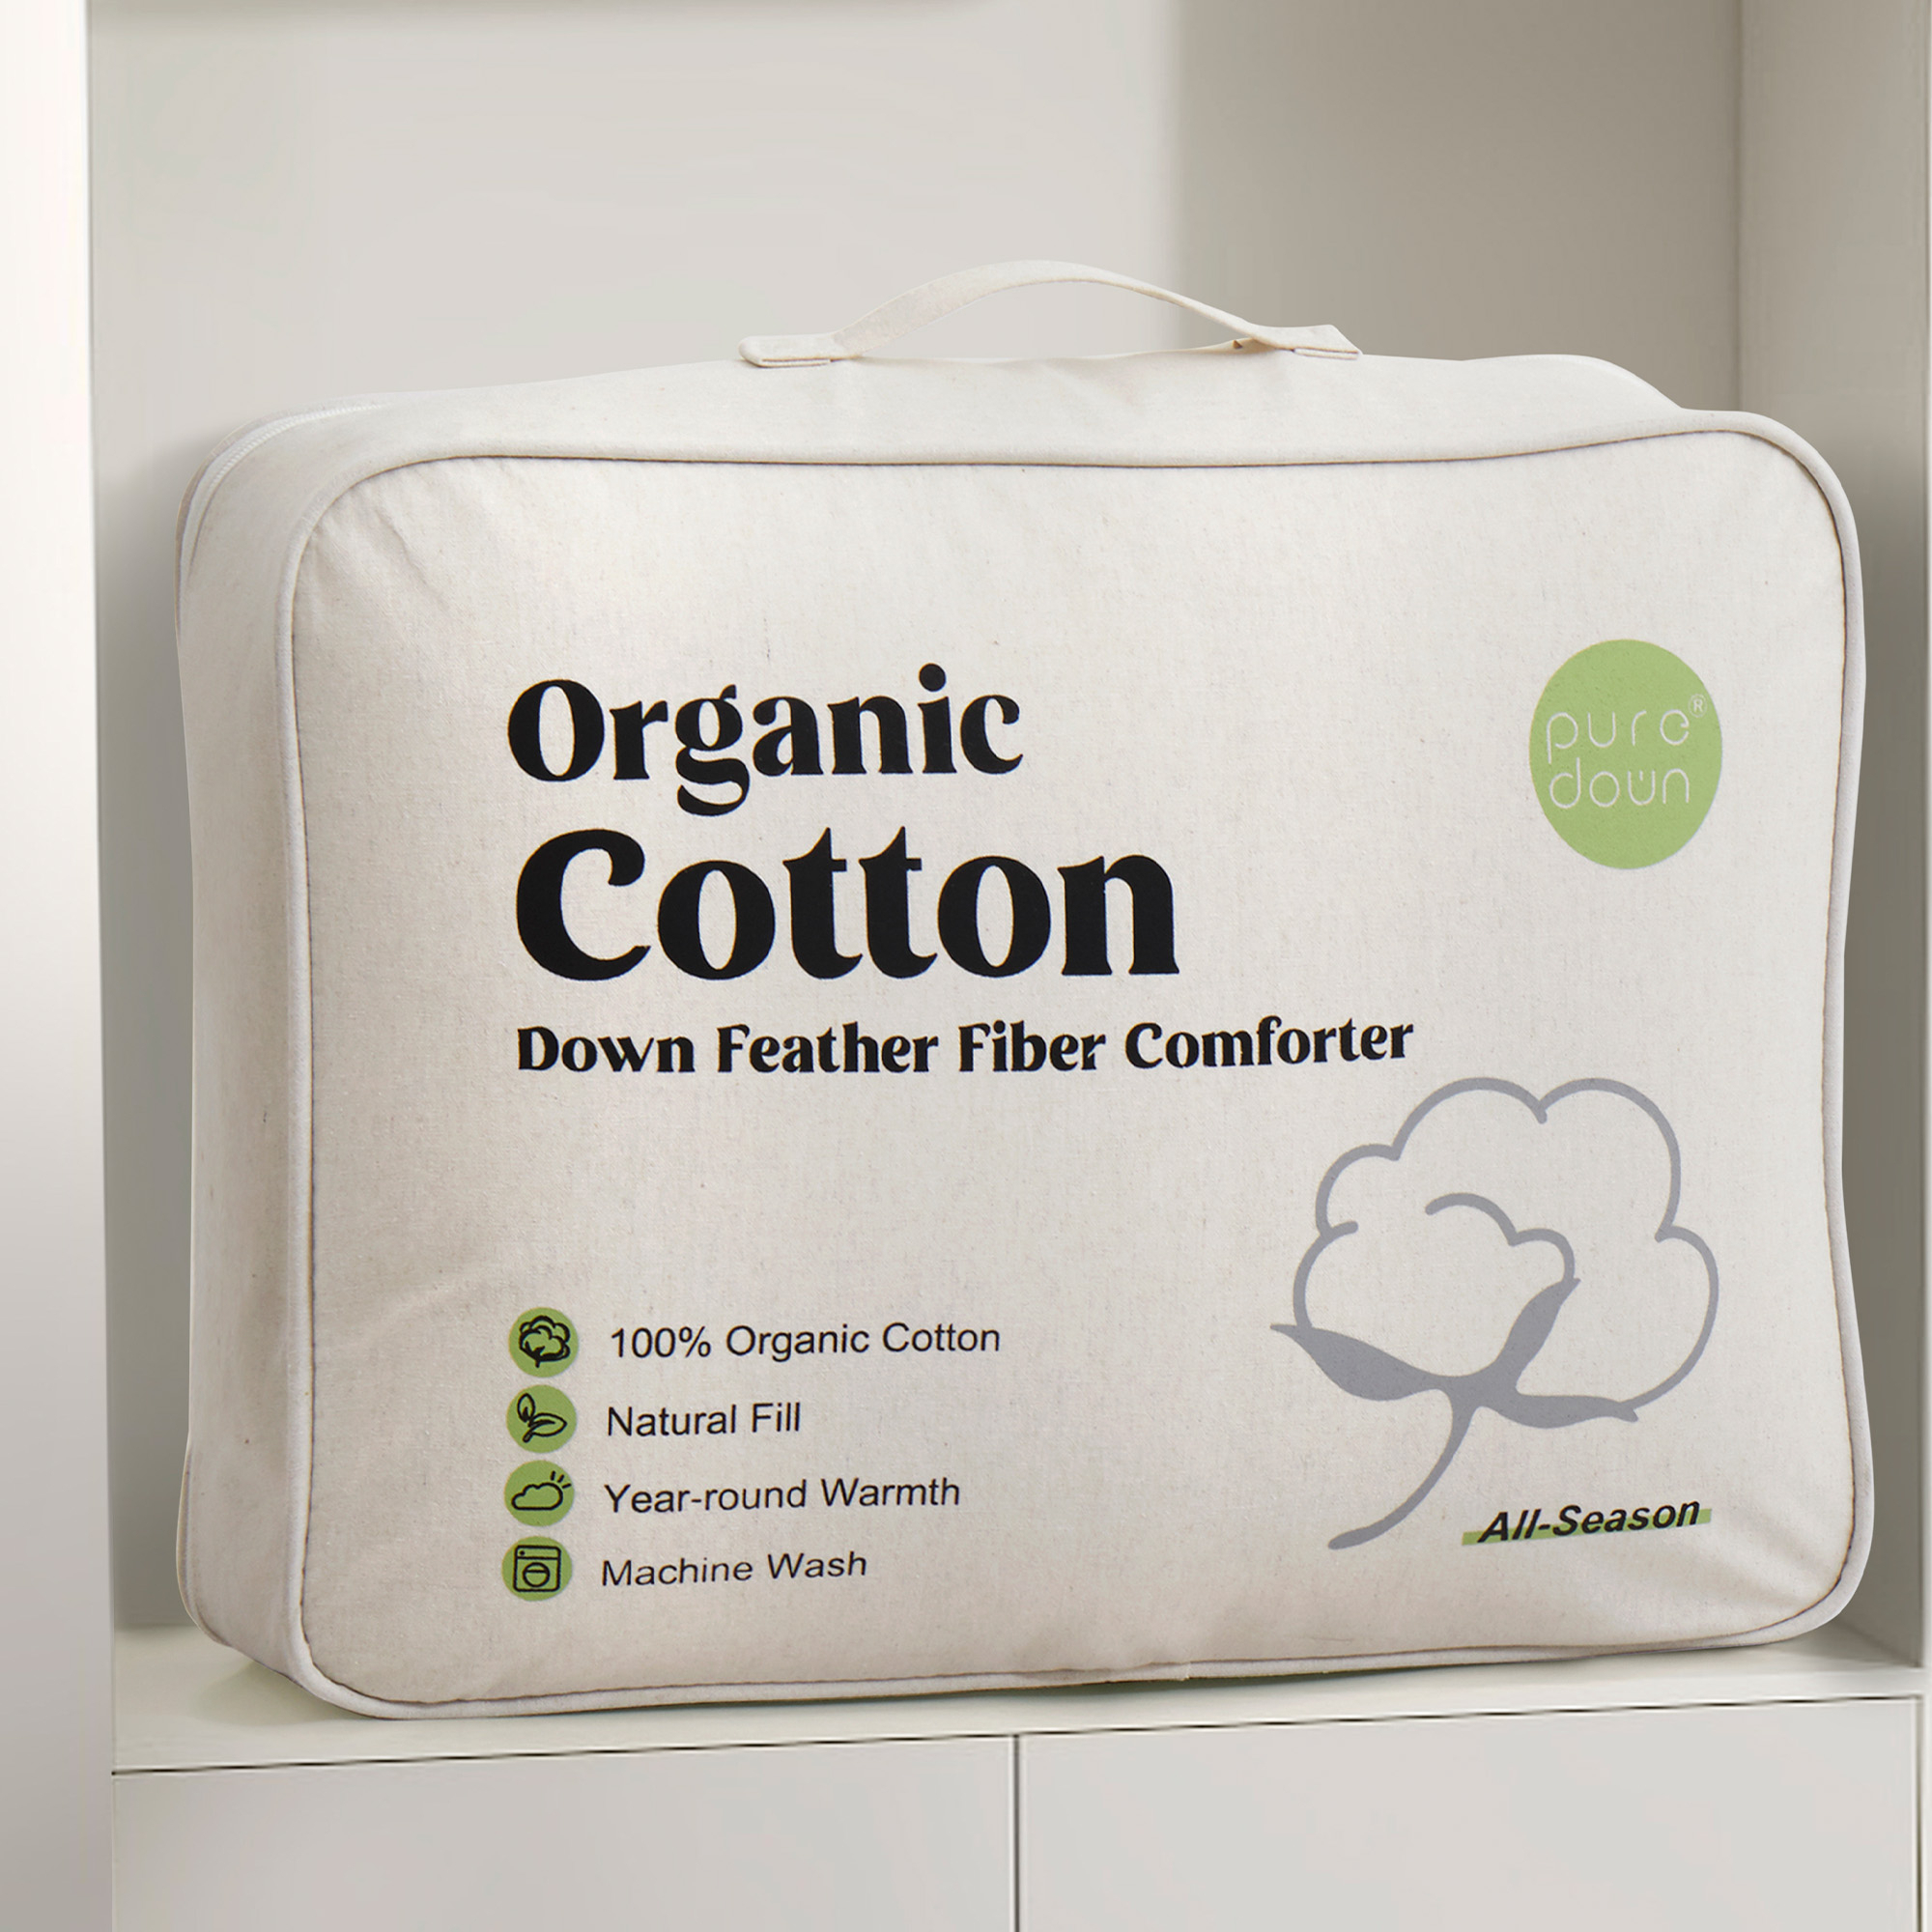 All Season Goose Down And Feather Fiber Comforter With Organic Cotton Fabric - Twin